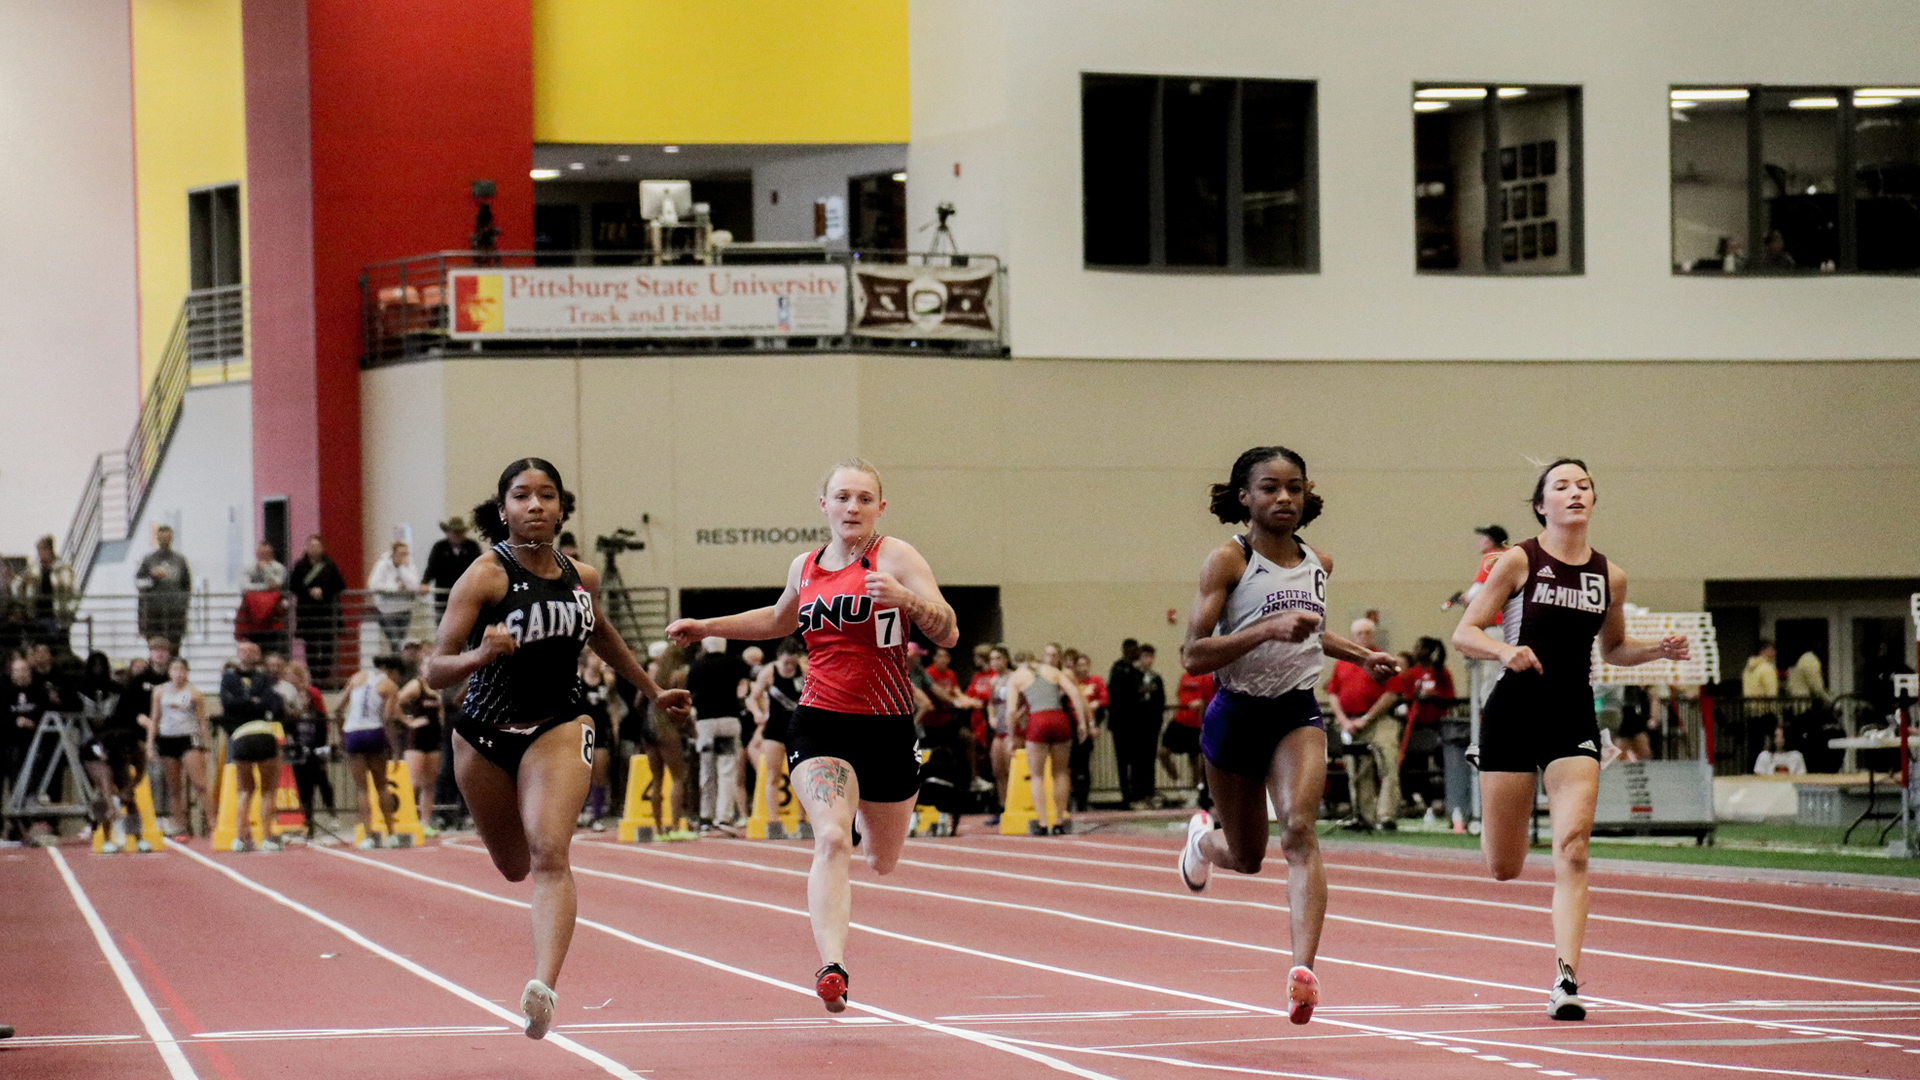 Kiana Kebbi competed in the 60m and 200m events.